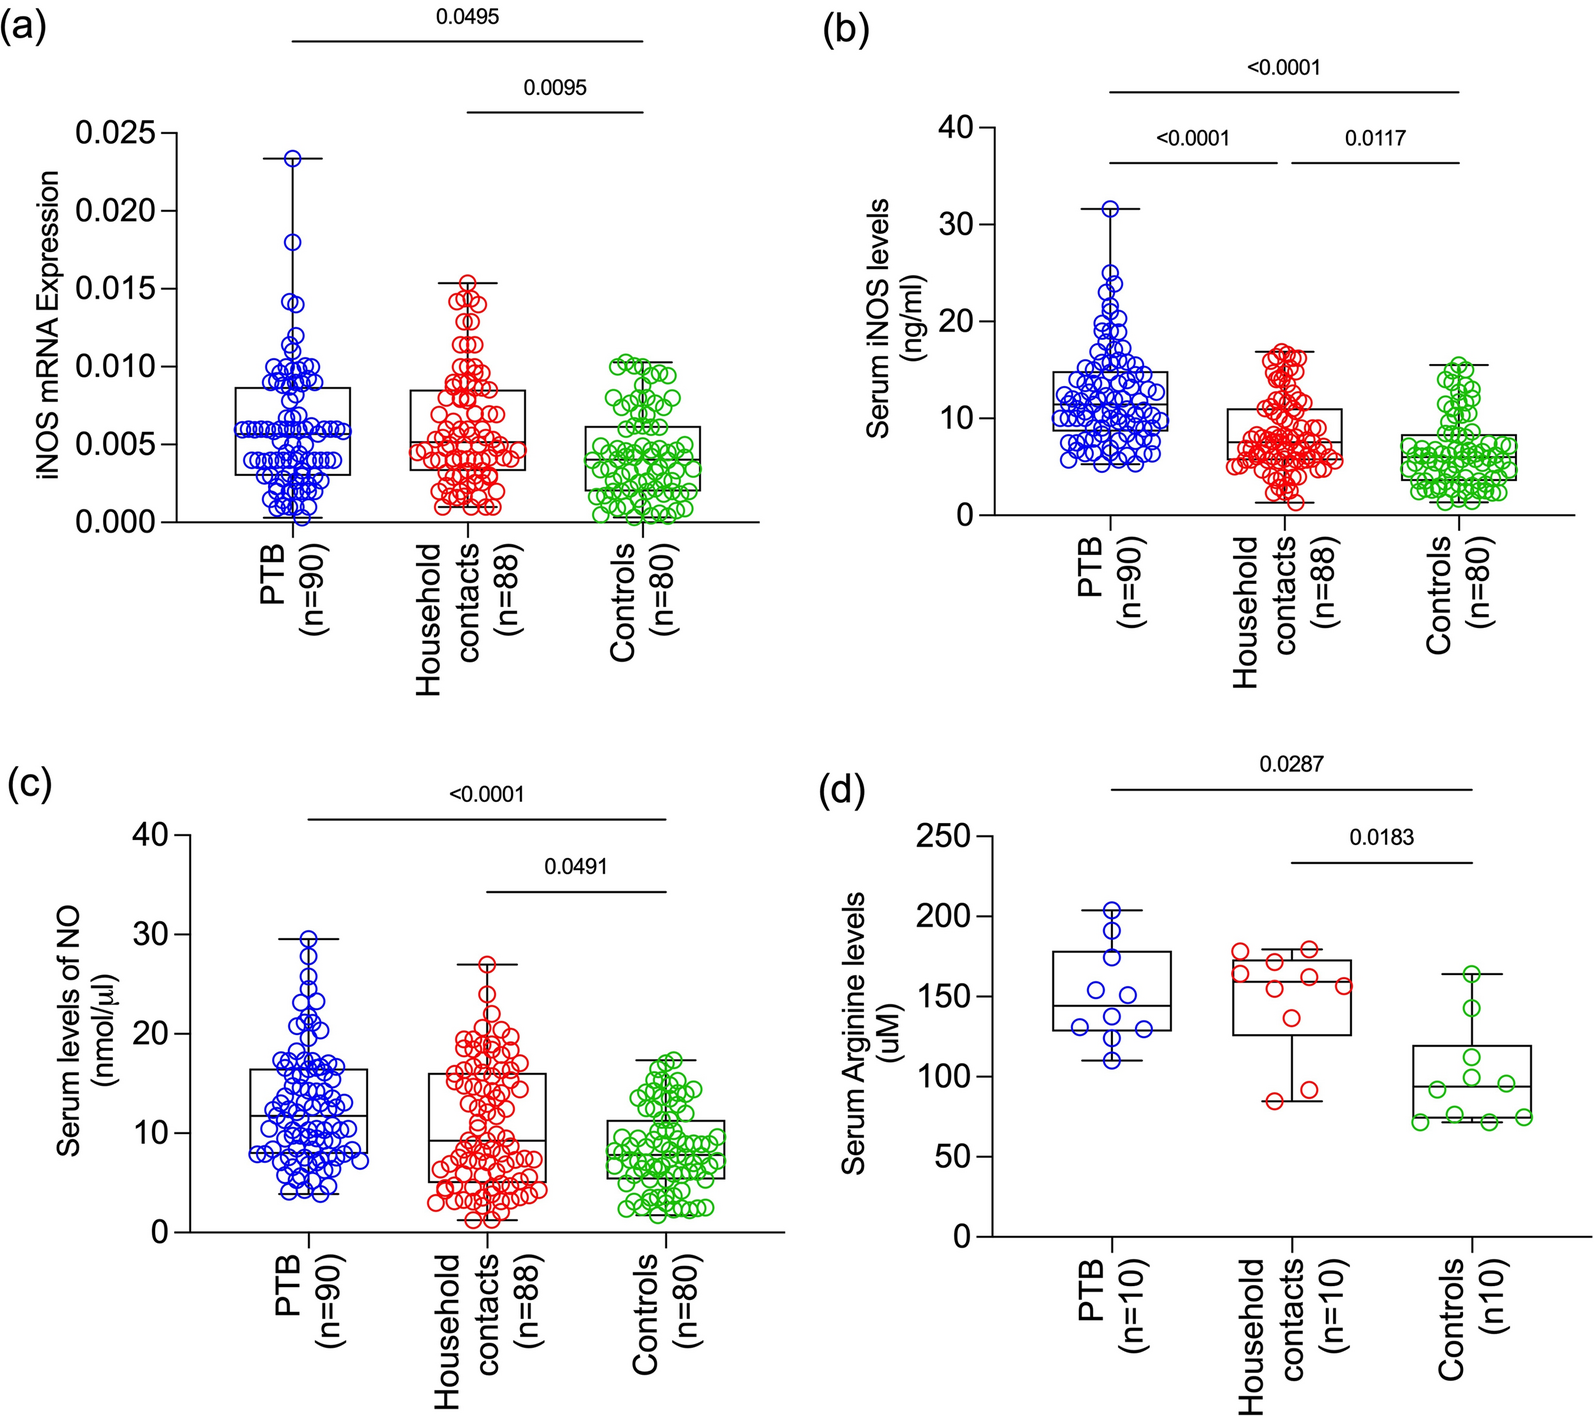 Nitric oxide brings innate immune resistance to M. tuberculosis infection among high-risk household contacts of pulmonary tuberculosis patients